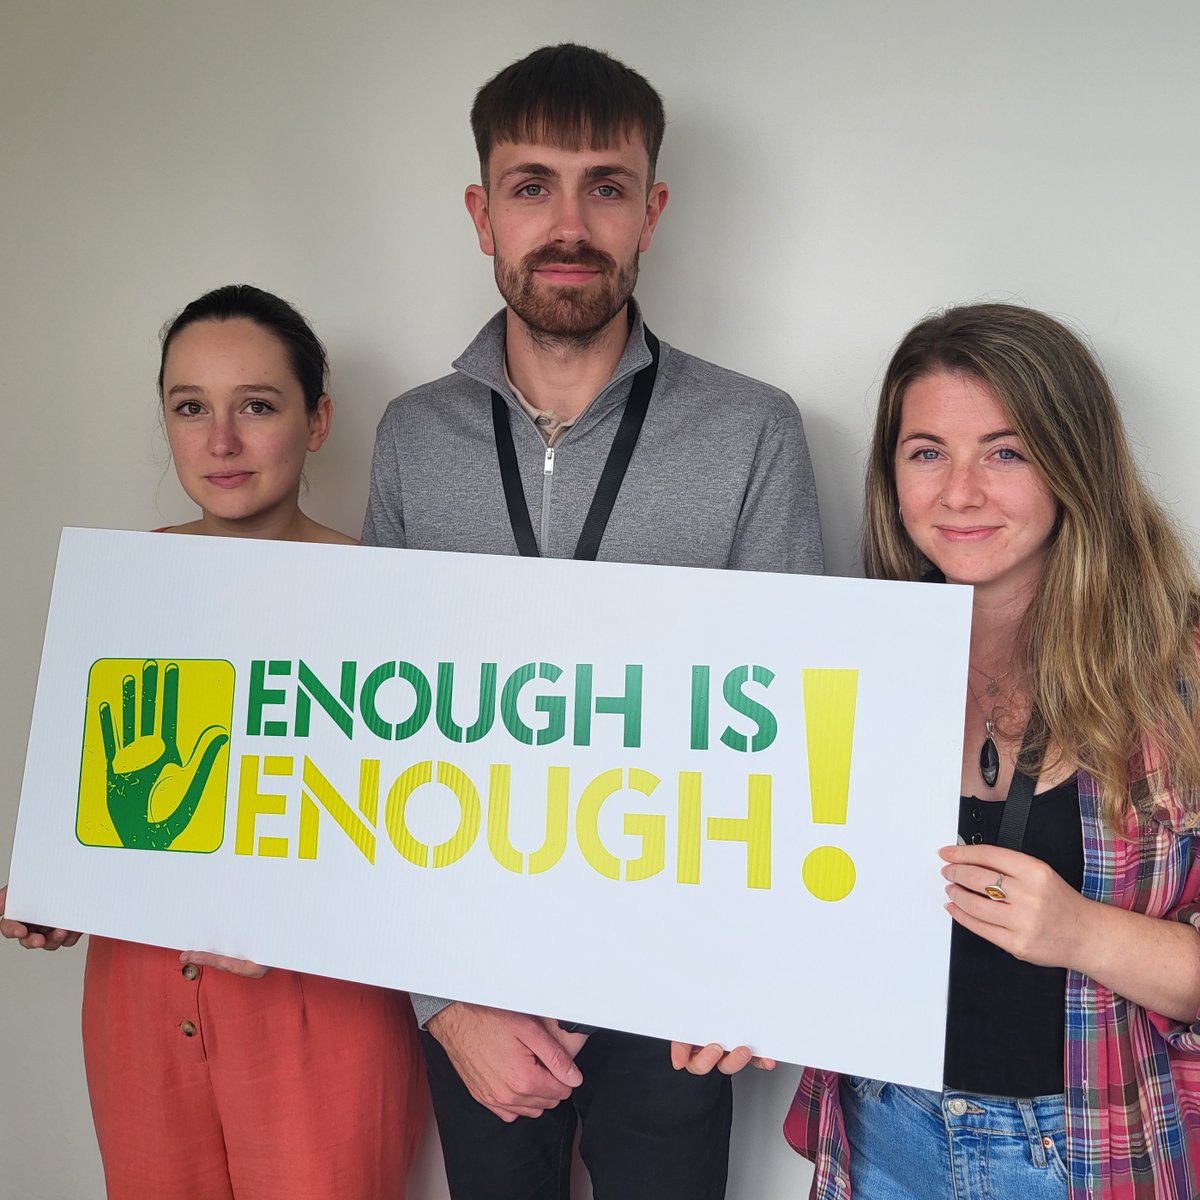 Today @InsuranceRefIre launch the #EnoughIsEnough campaign! We support The Alliance for Insurance Reform in saying enough to unjustifiable claims that drive up our insurance premiums and put what we do at risk. #EnoughIsEnough #InsuranceReform